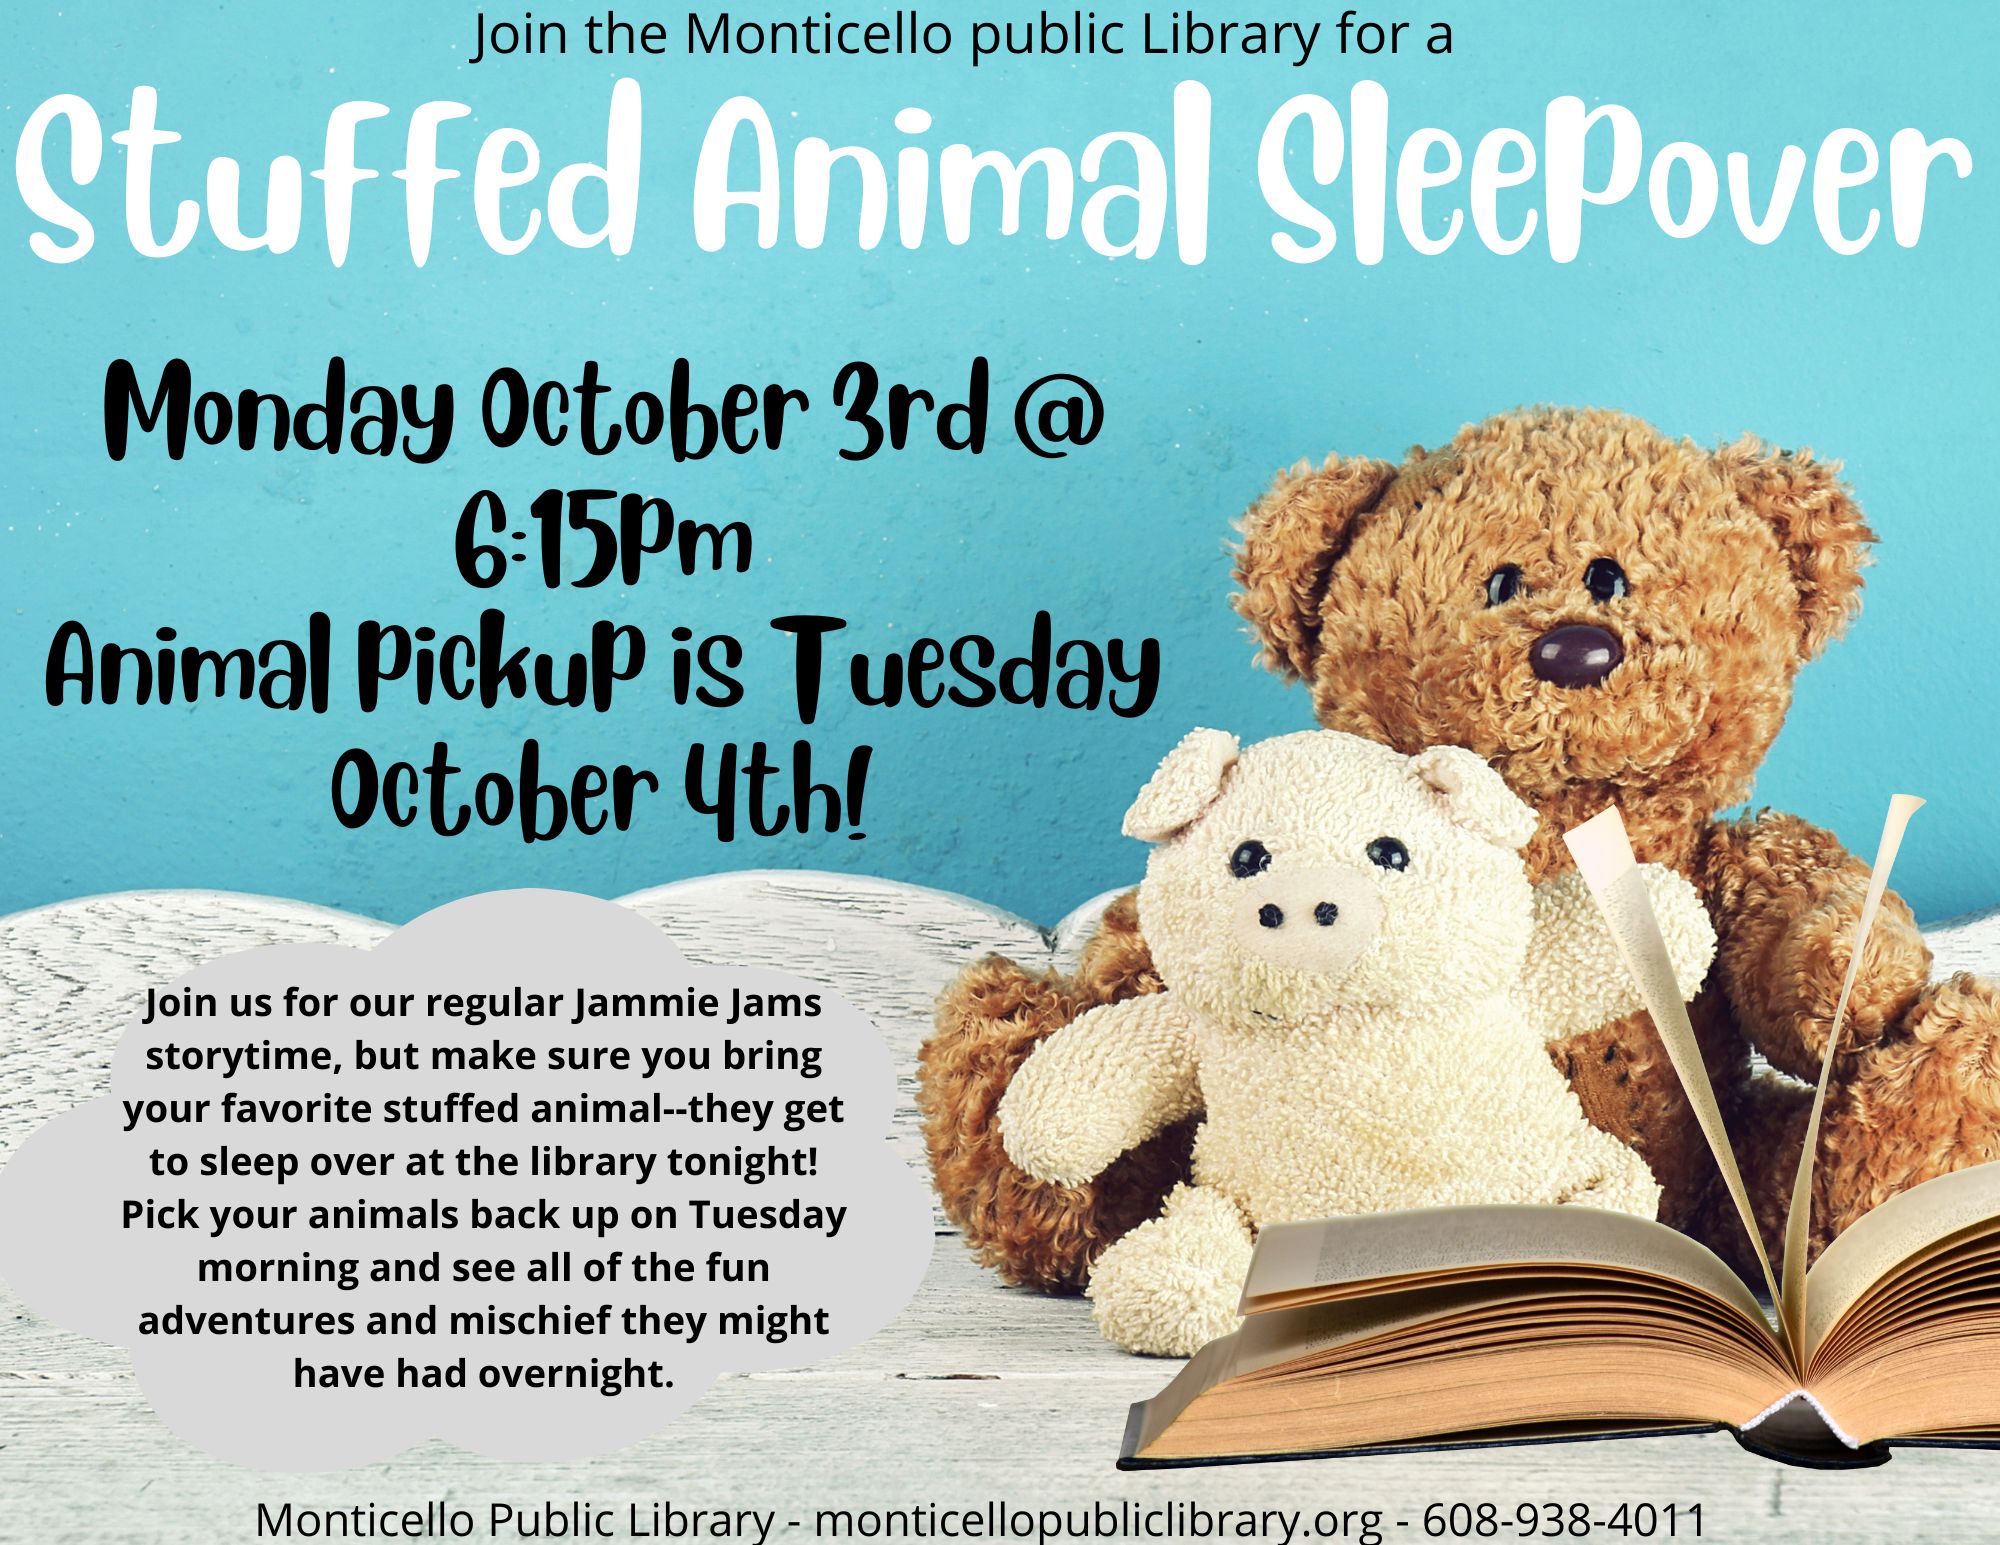 Bring your stuffed animals for a library sleepover